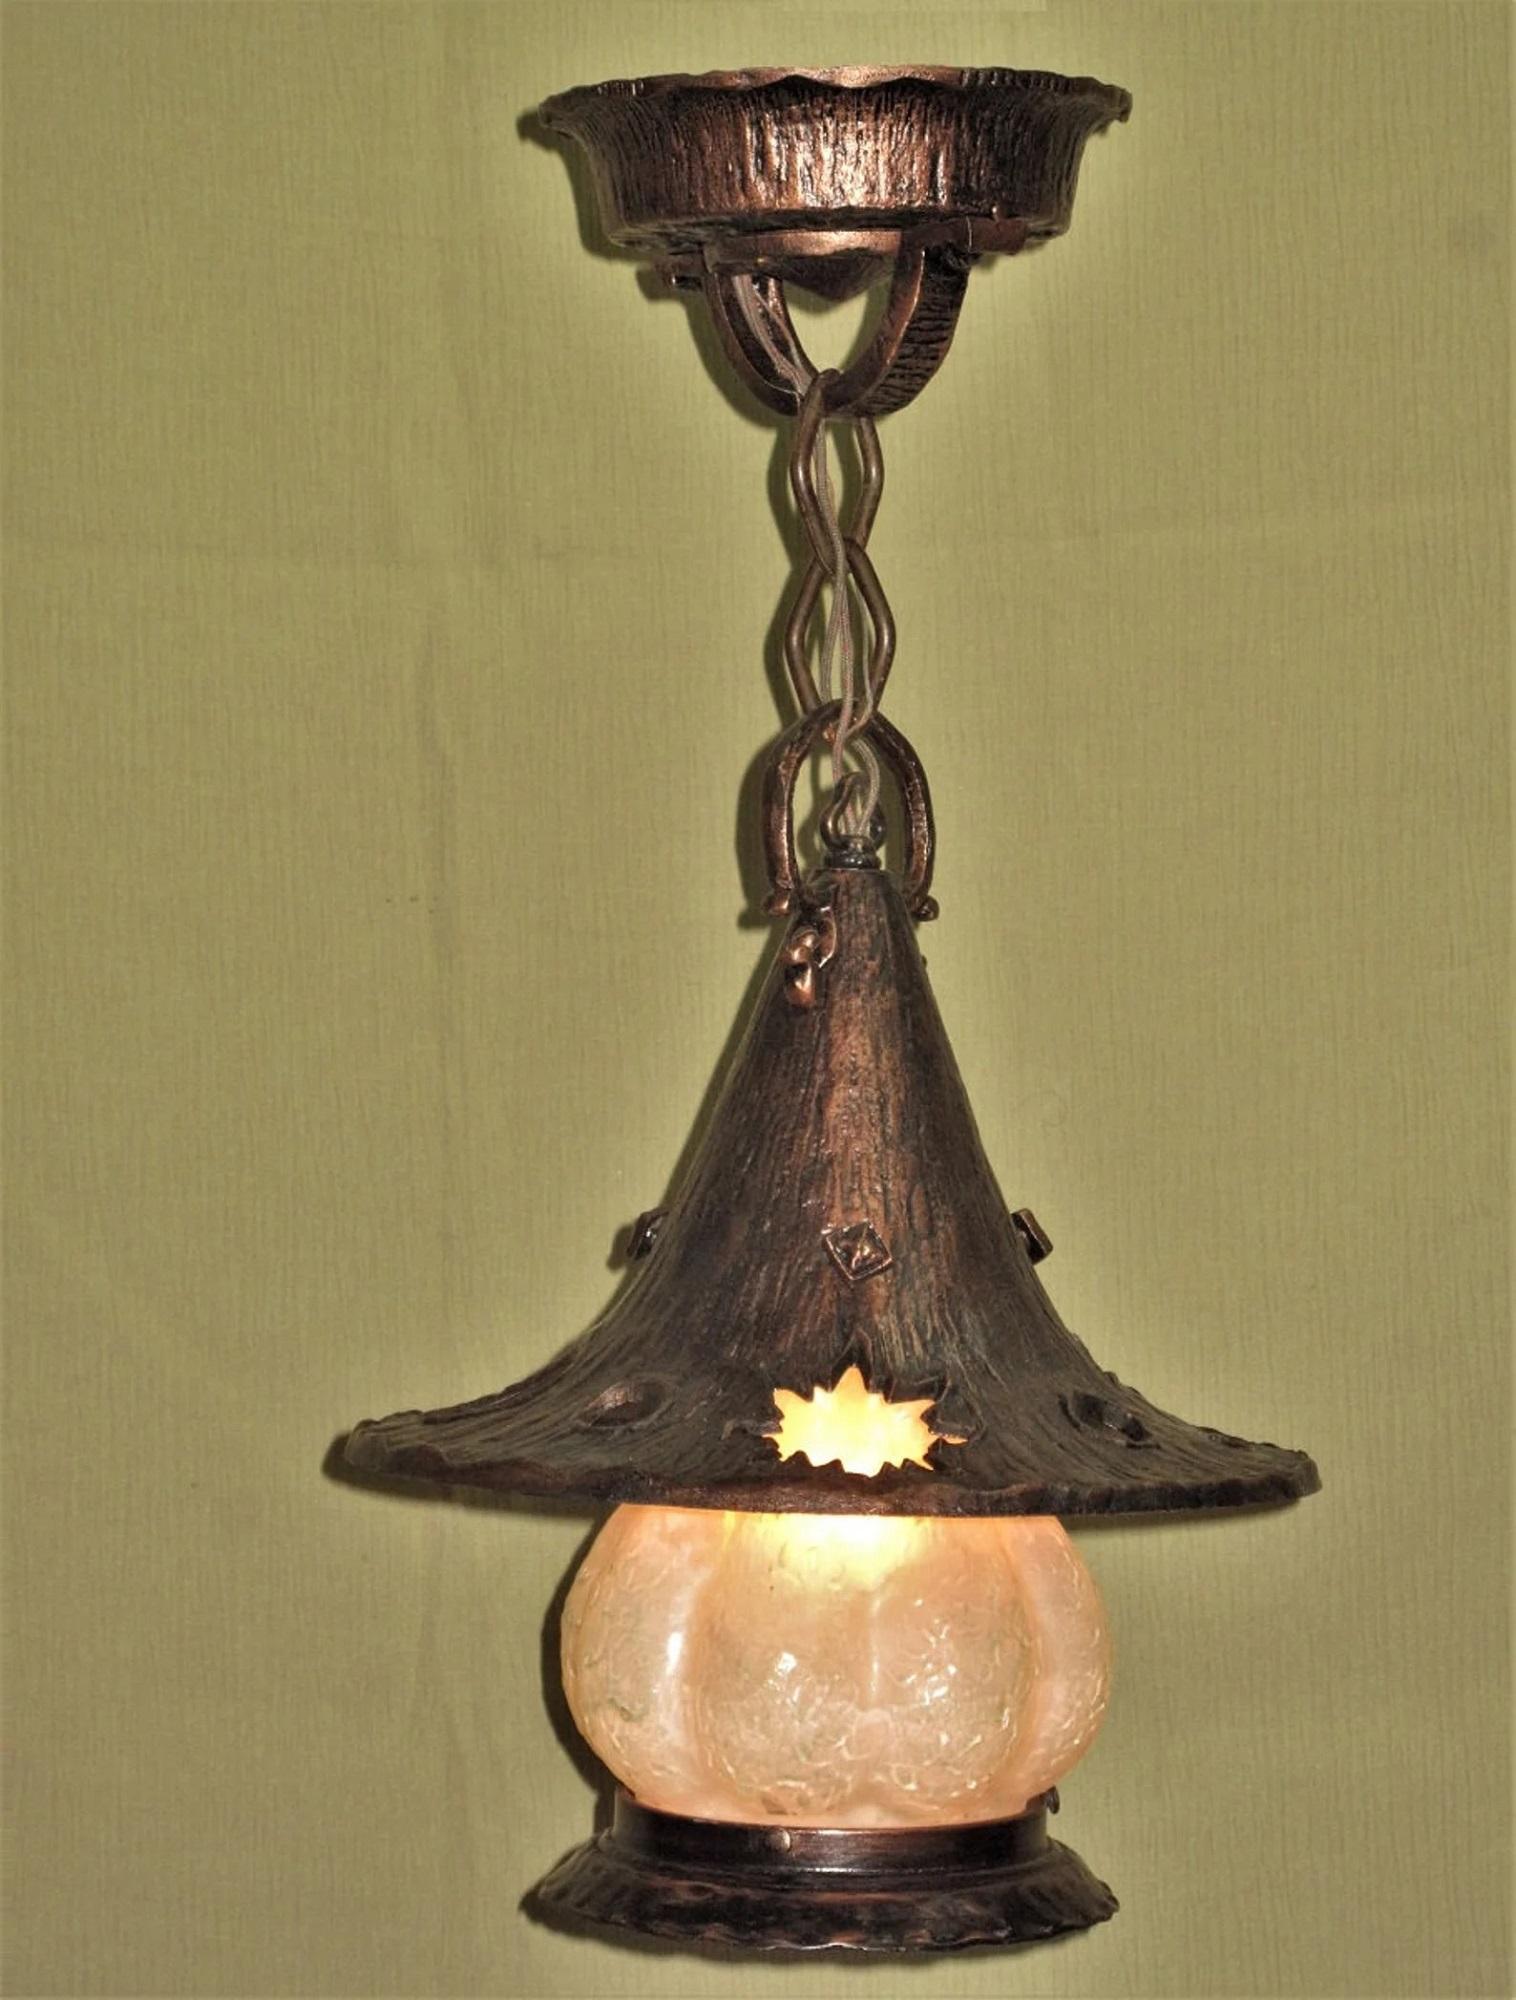 The best example of a Storybook style porch light we have ever had. Tall witches hat shade with the moon, star, sun, and planet cut outs ring the flair of the hat, covering a squatty milk glass shade. The witches hat covering, the bottom skirt on